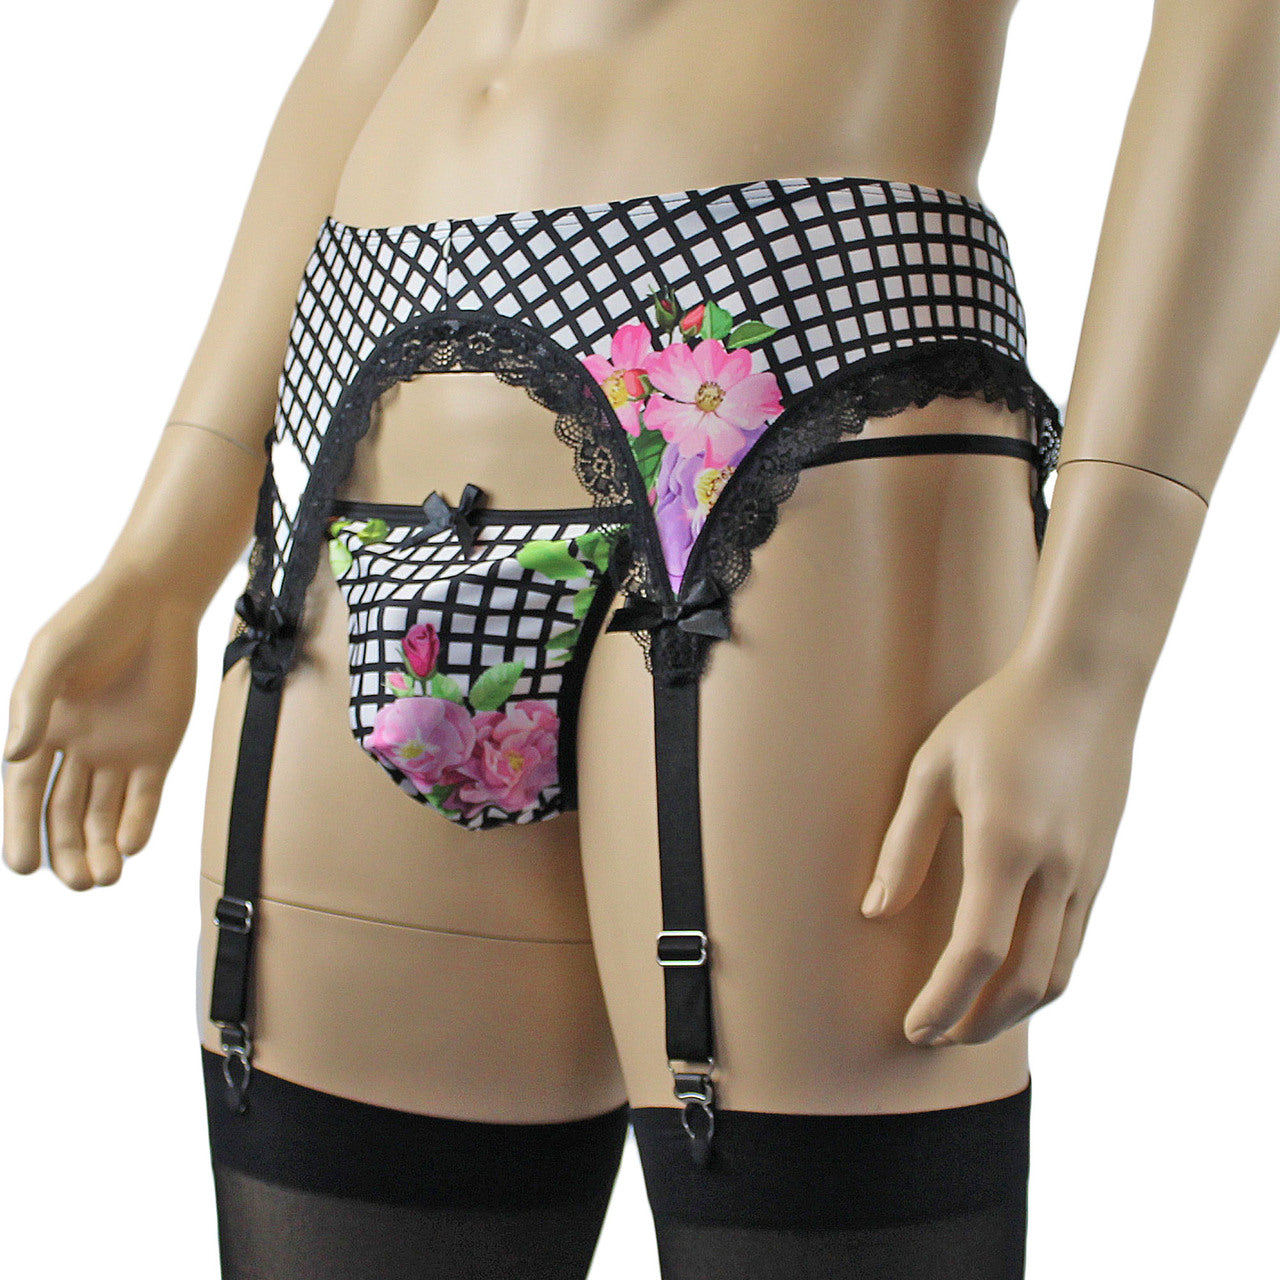 Mens Diana Garterbelt & G string Pouch in our Flower Checkered Print Spandex